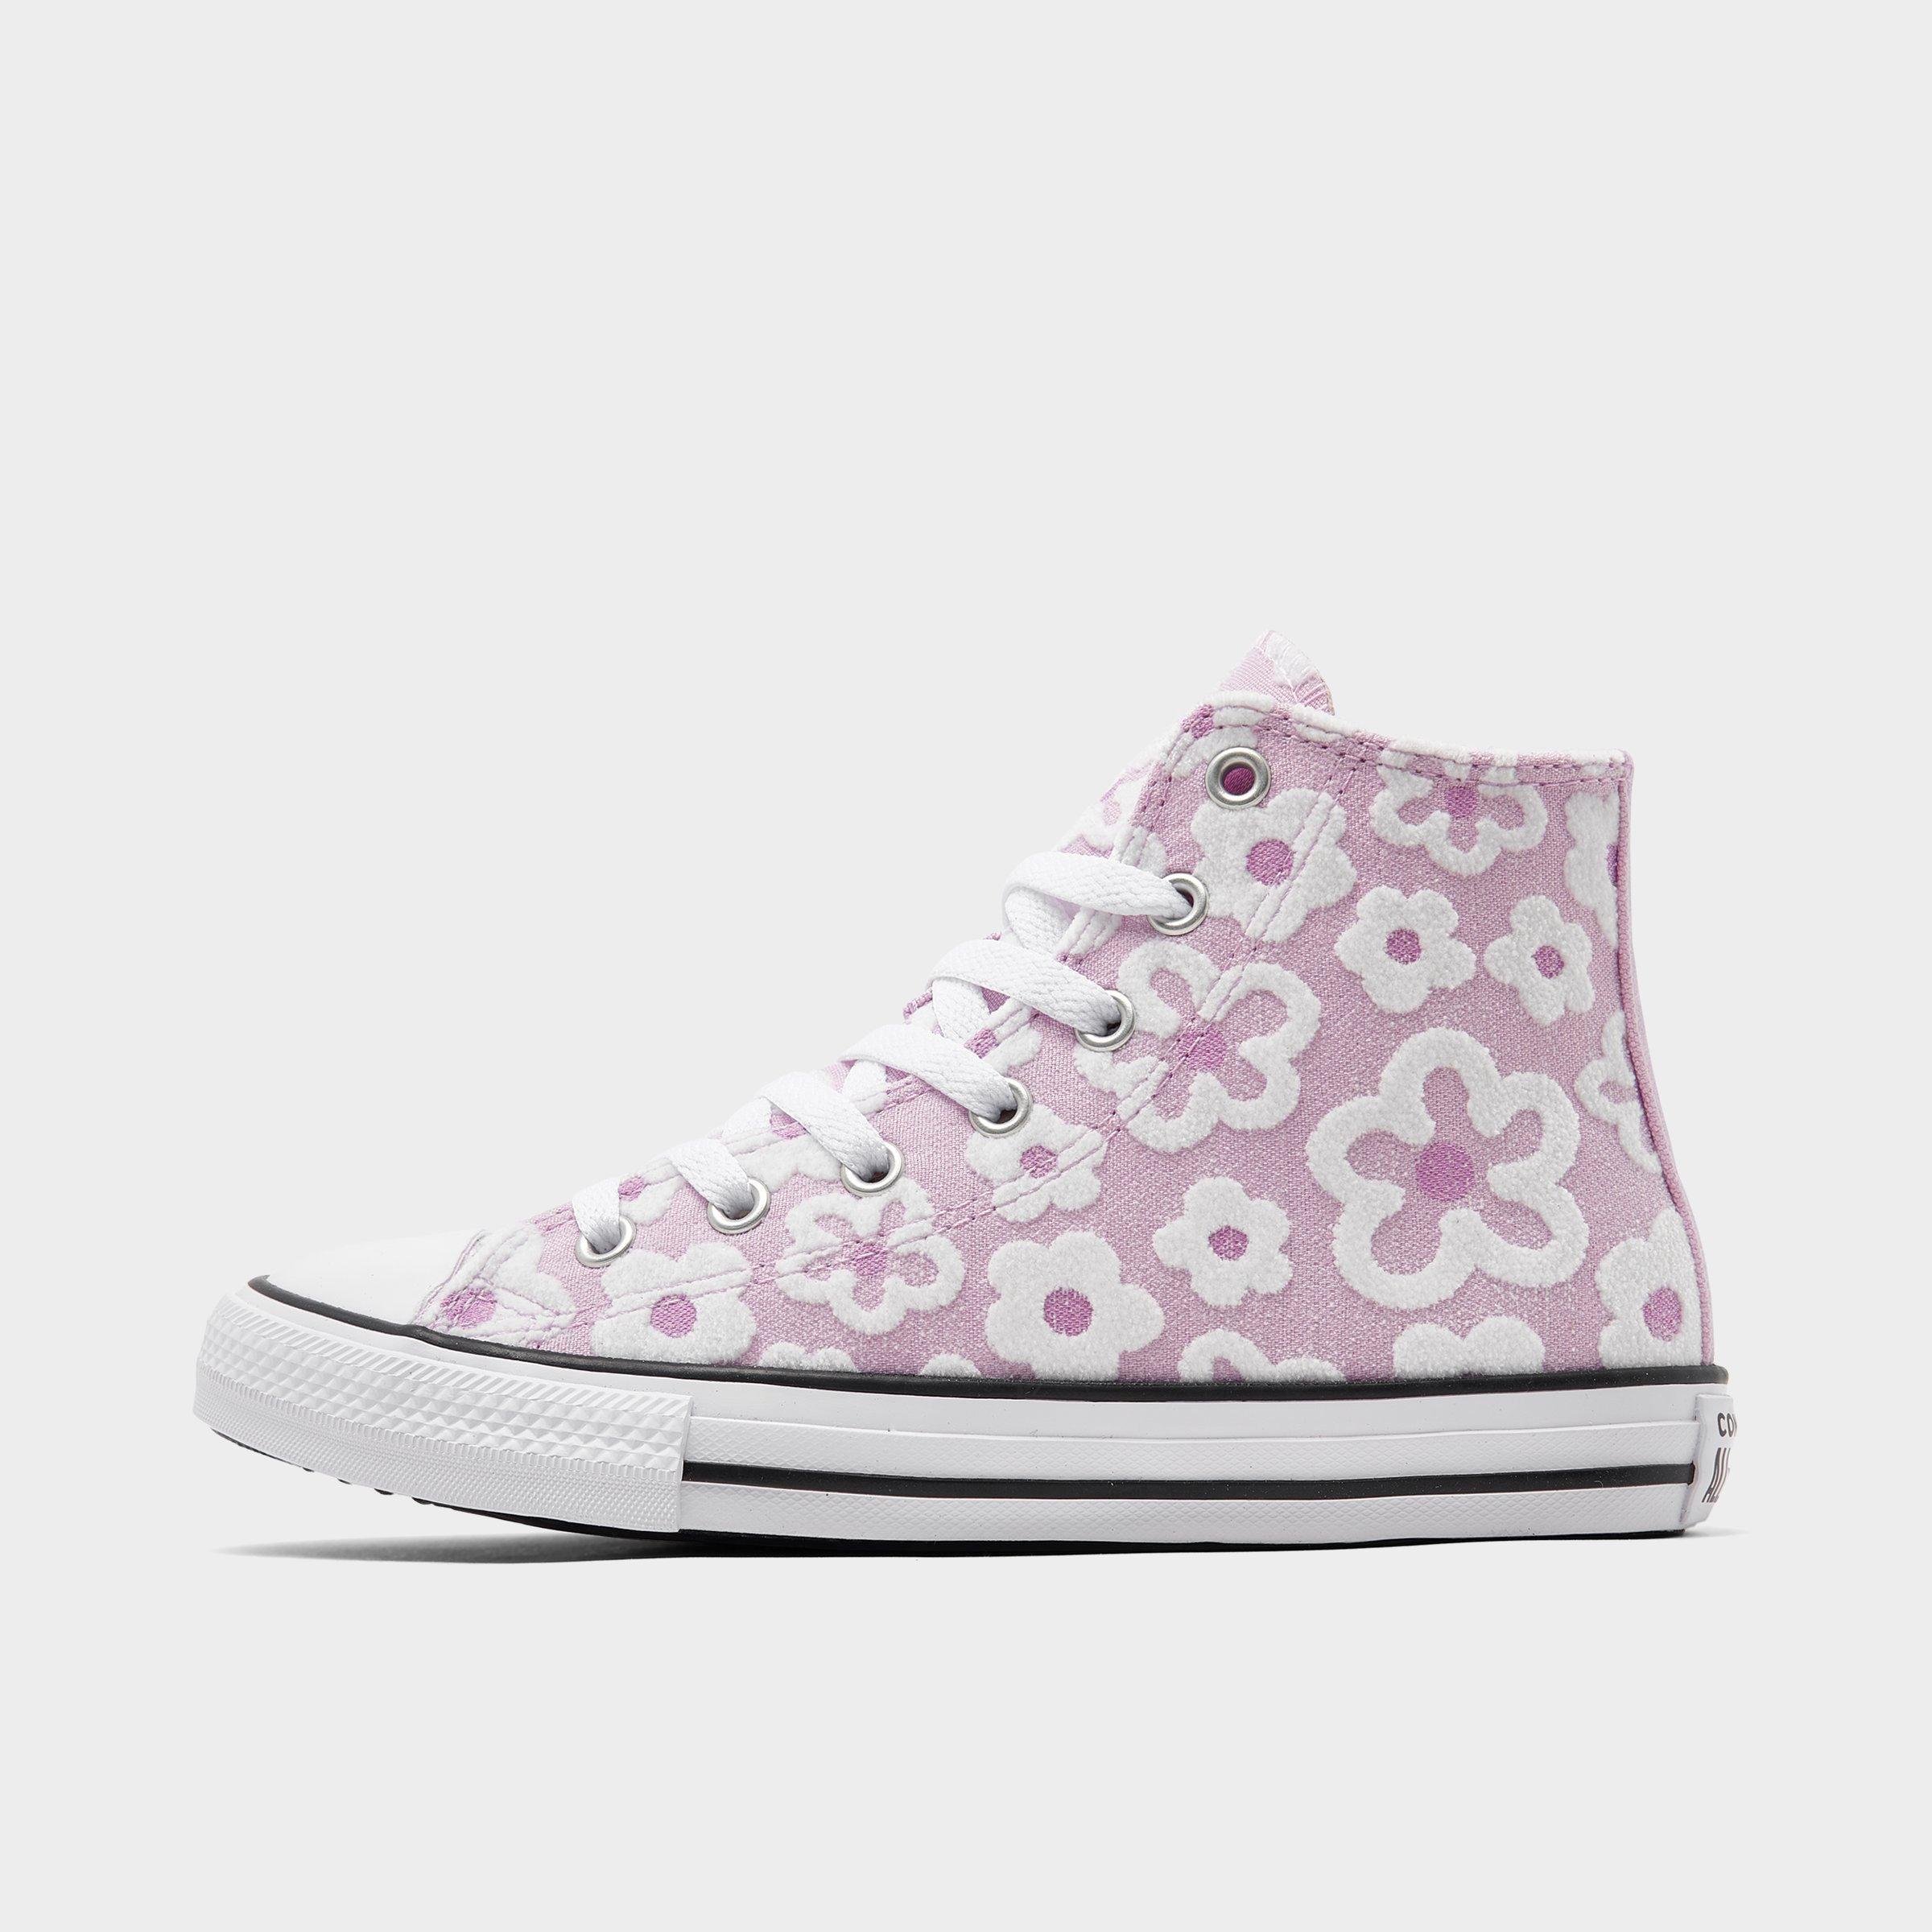 UPC 194434650495 product image for Converse Girls' Little Kids' Chuck Taylor High Top Casual Shoes in Pink/Stardust | upcitemdb.com